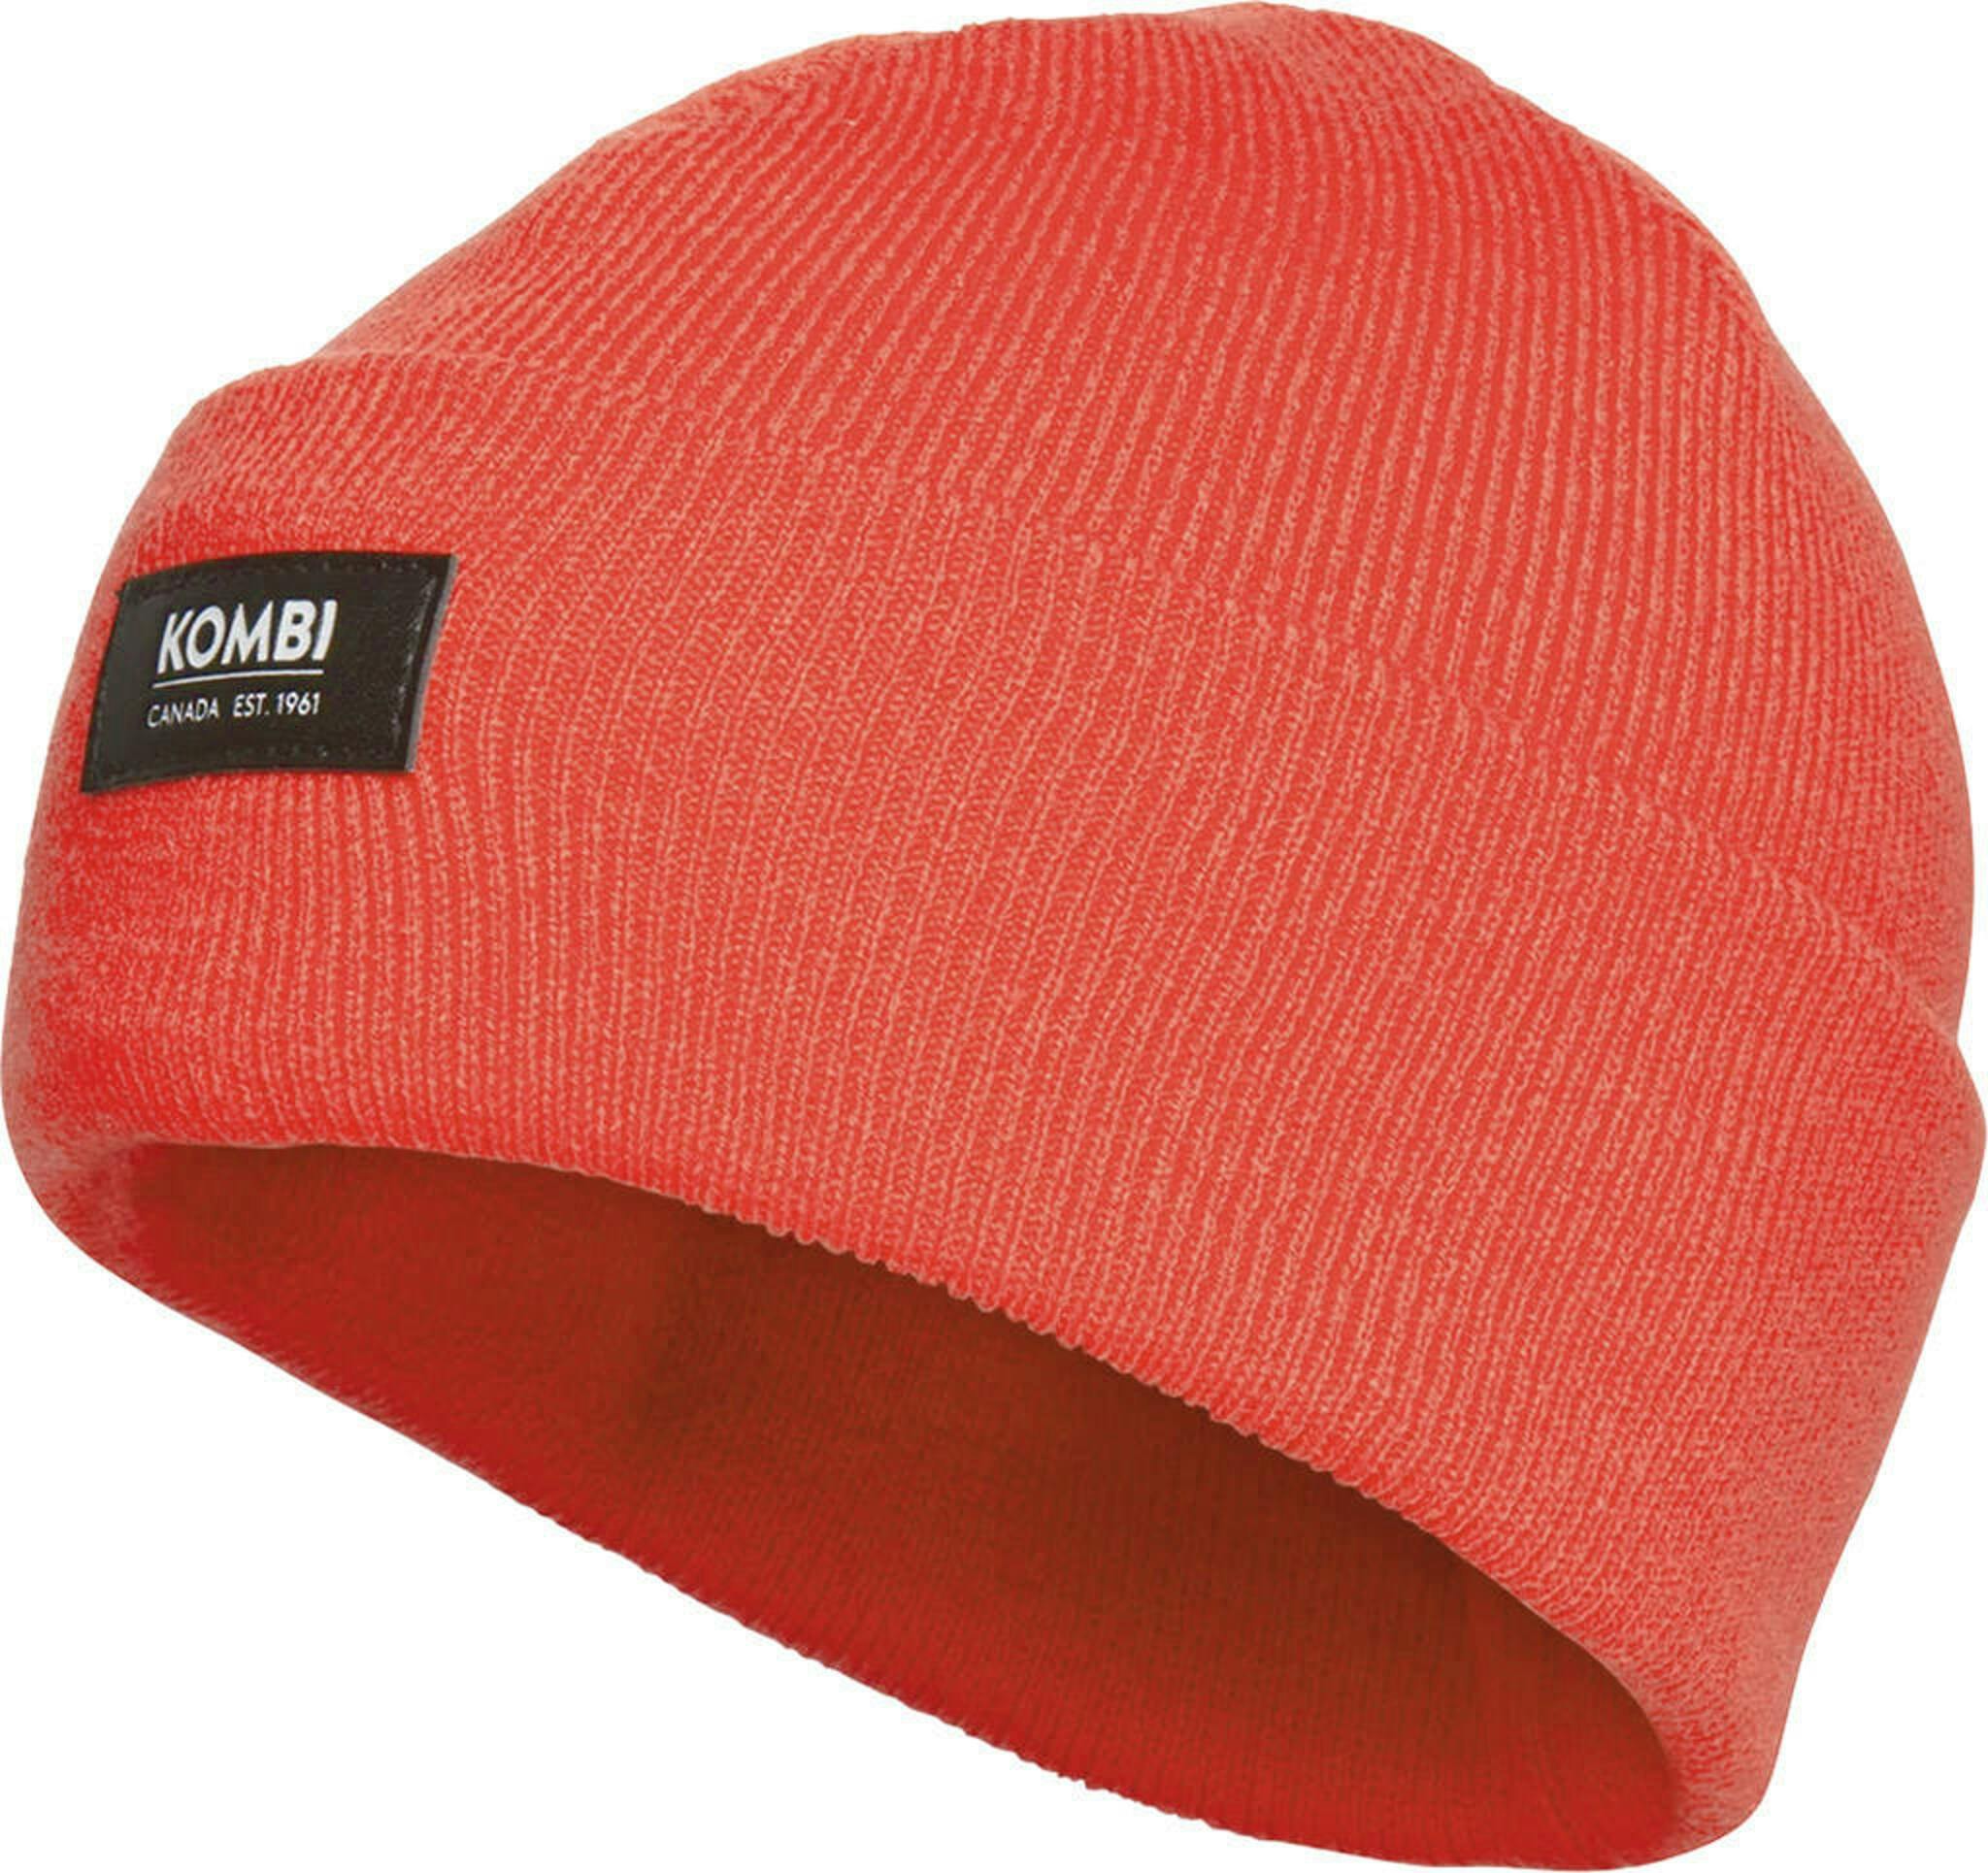 Product image for The Craze Beanie - Youth